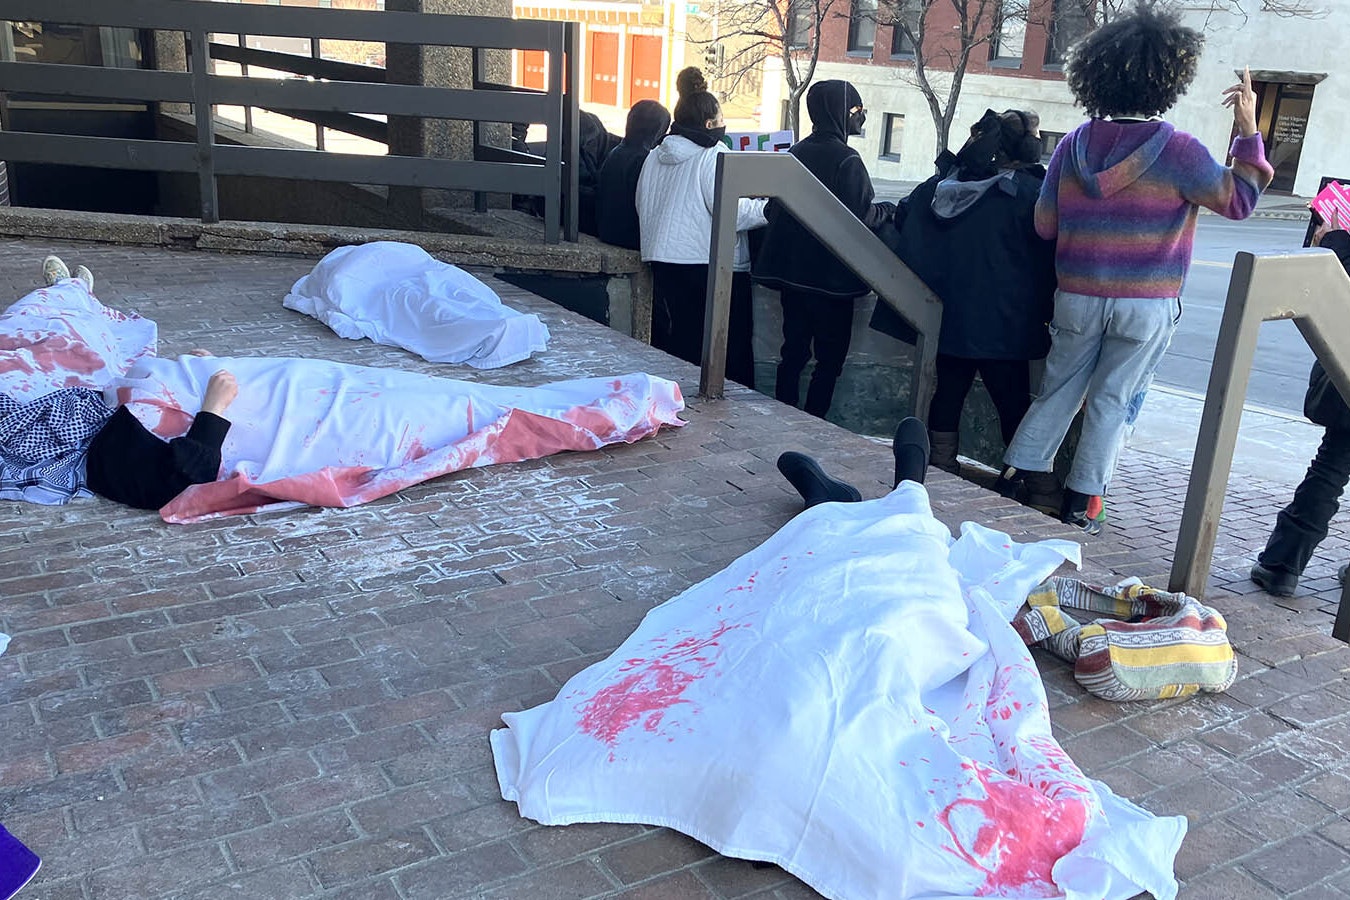 Protesters lay with sheets over their bodies to depict Palestinians who have been killed.